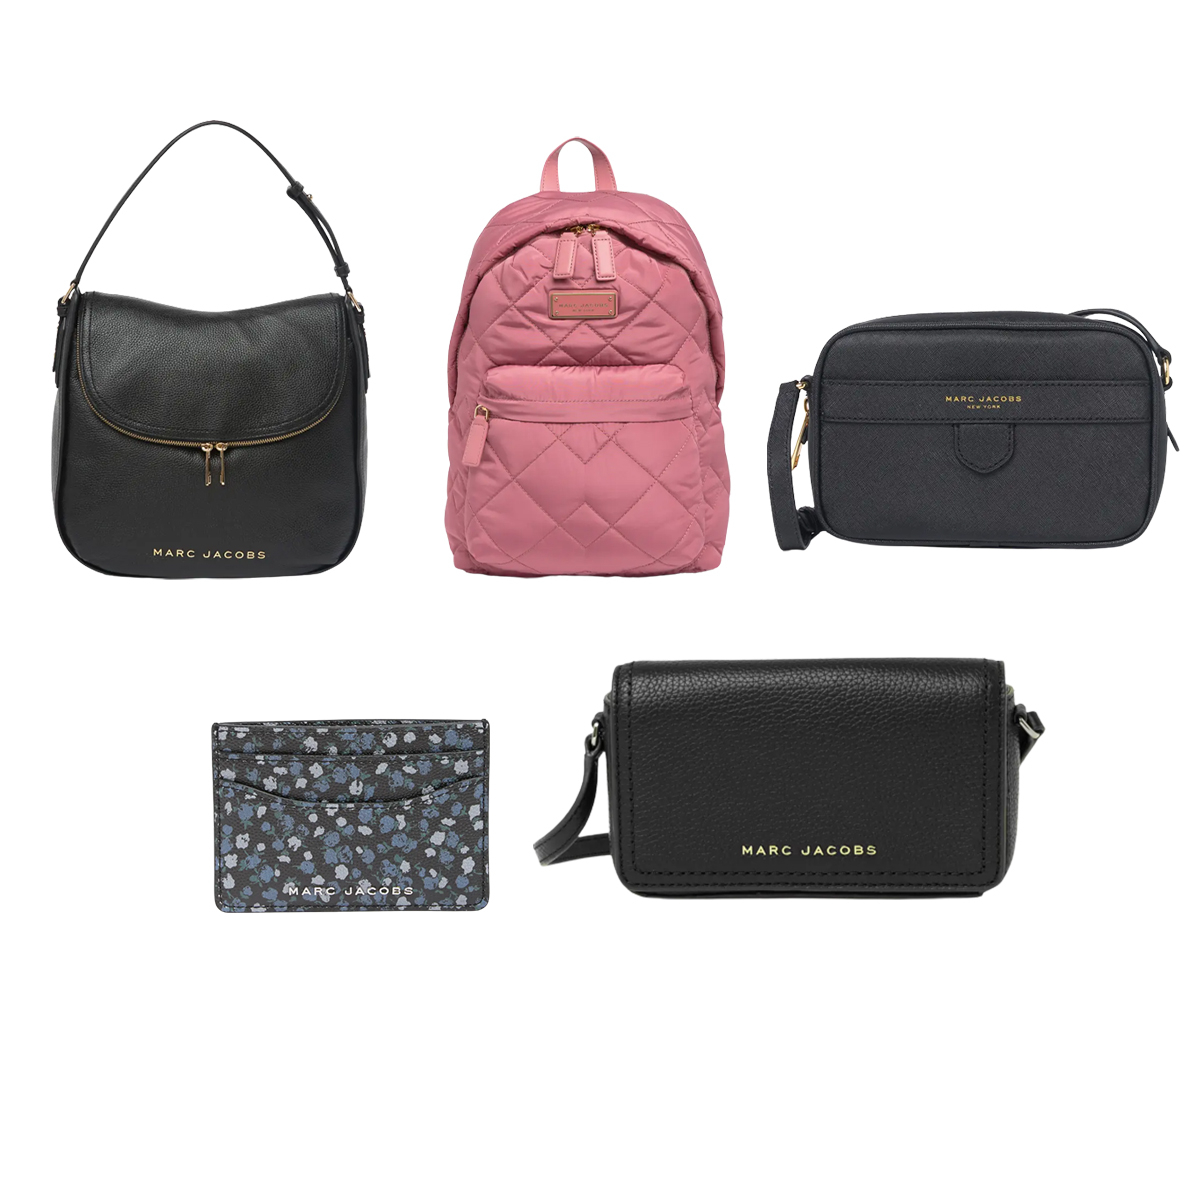 Nordstrom Rack Marc Jacobs Women Fashion Sale Up to 70% Off